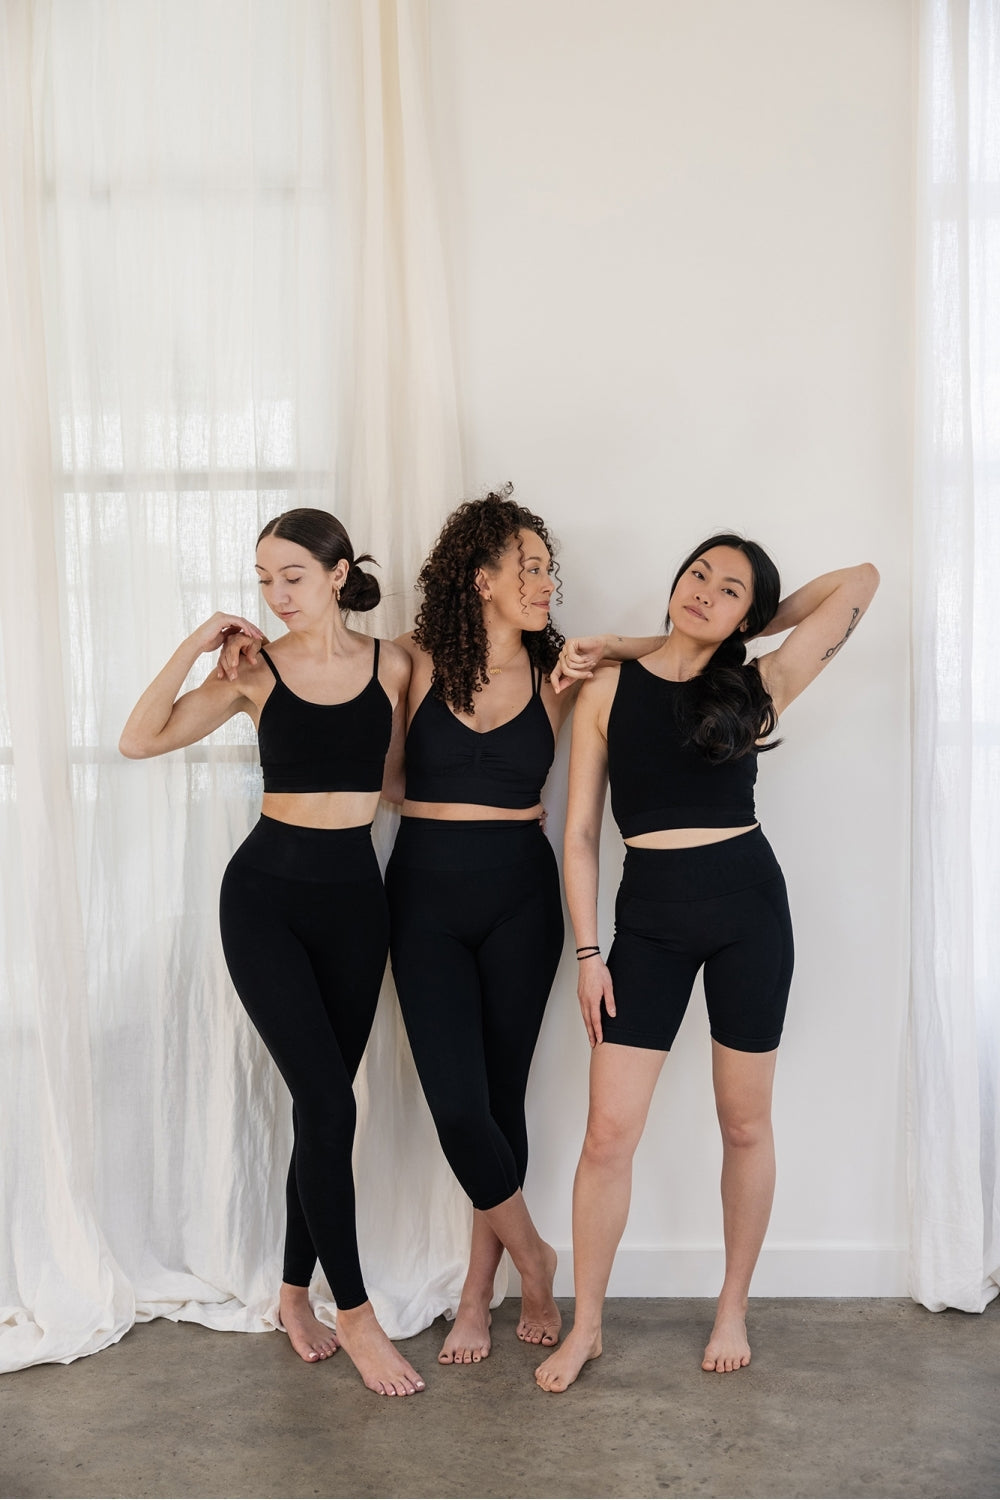 Models wearing black leggings and supportive sports bras for sustainable activewear brand, Jilla.